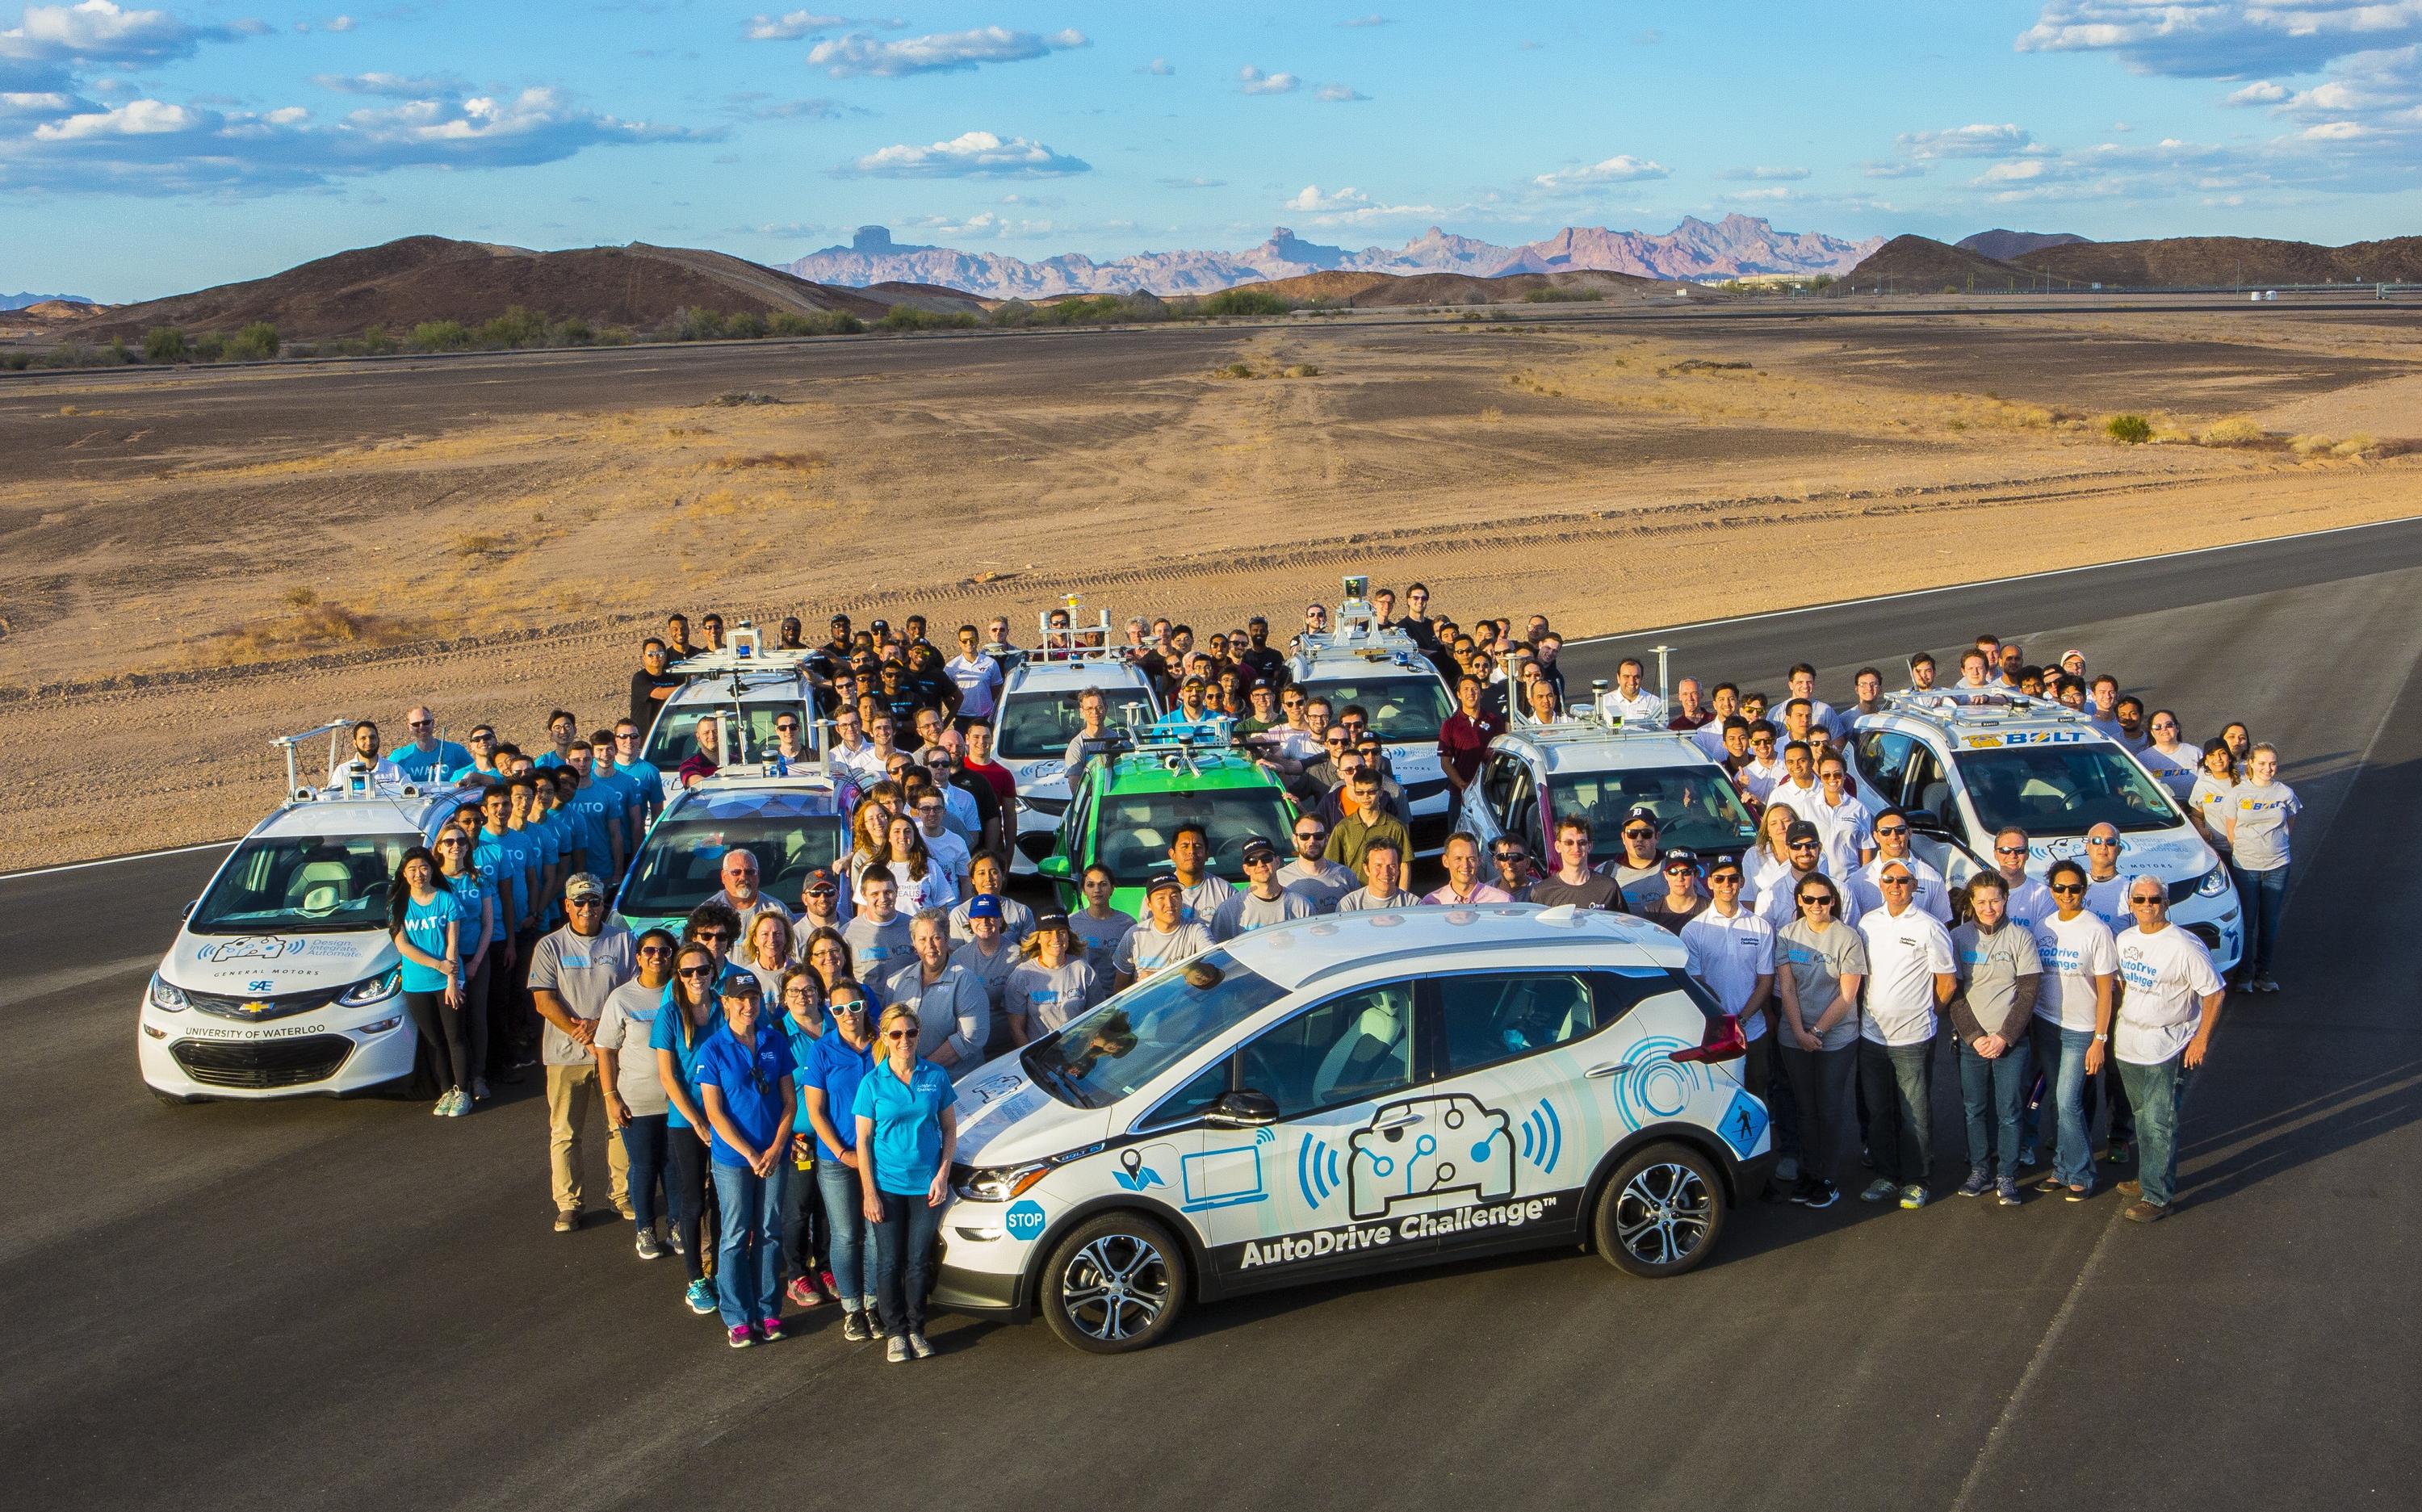 Teams pose for a group group at the AutoDrive Challenge in Arizona.